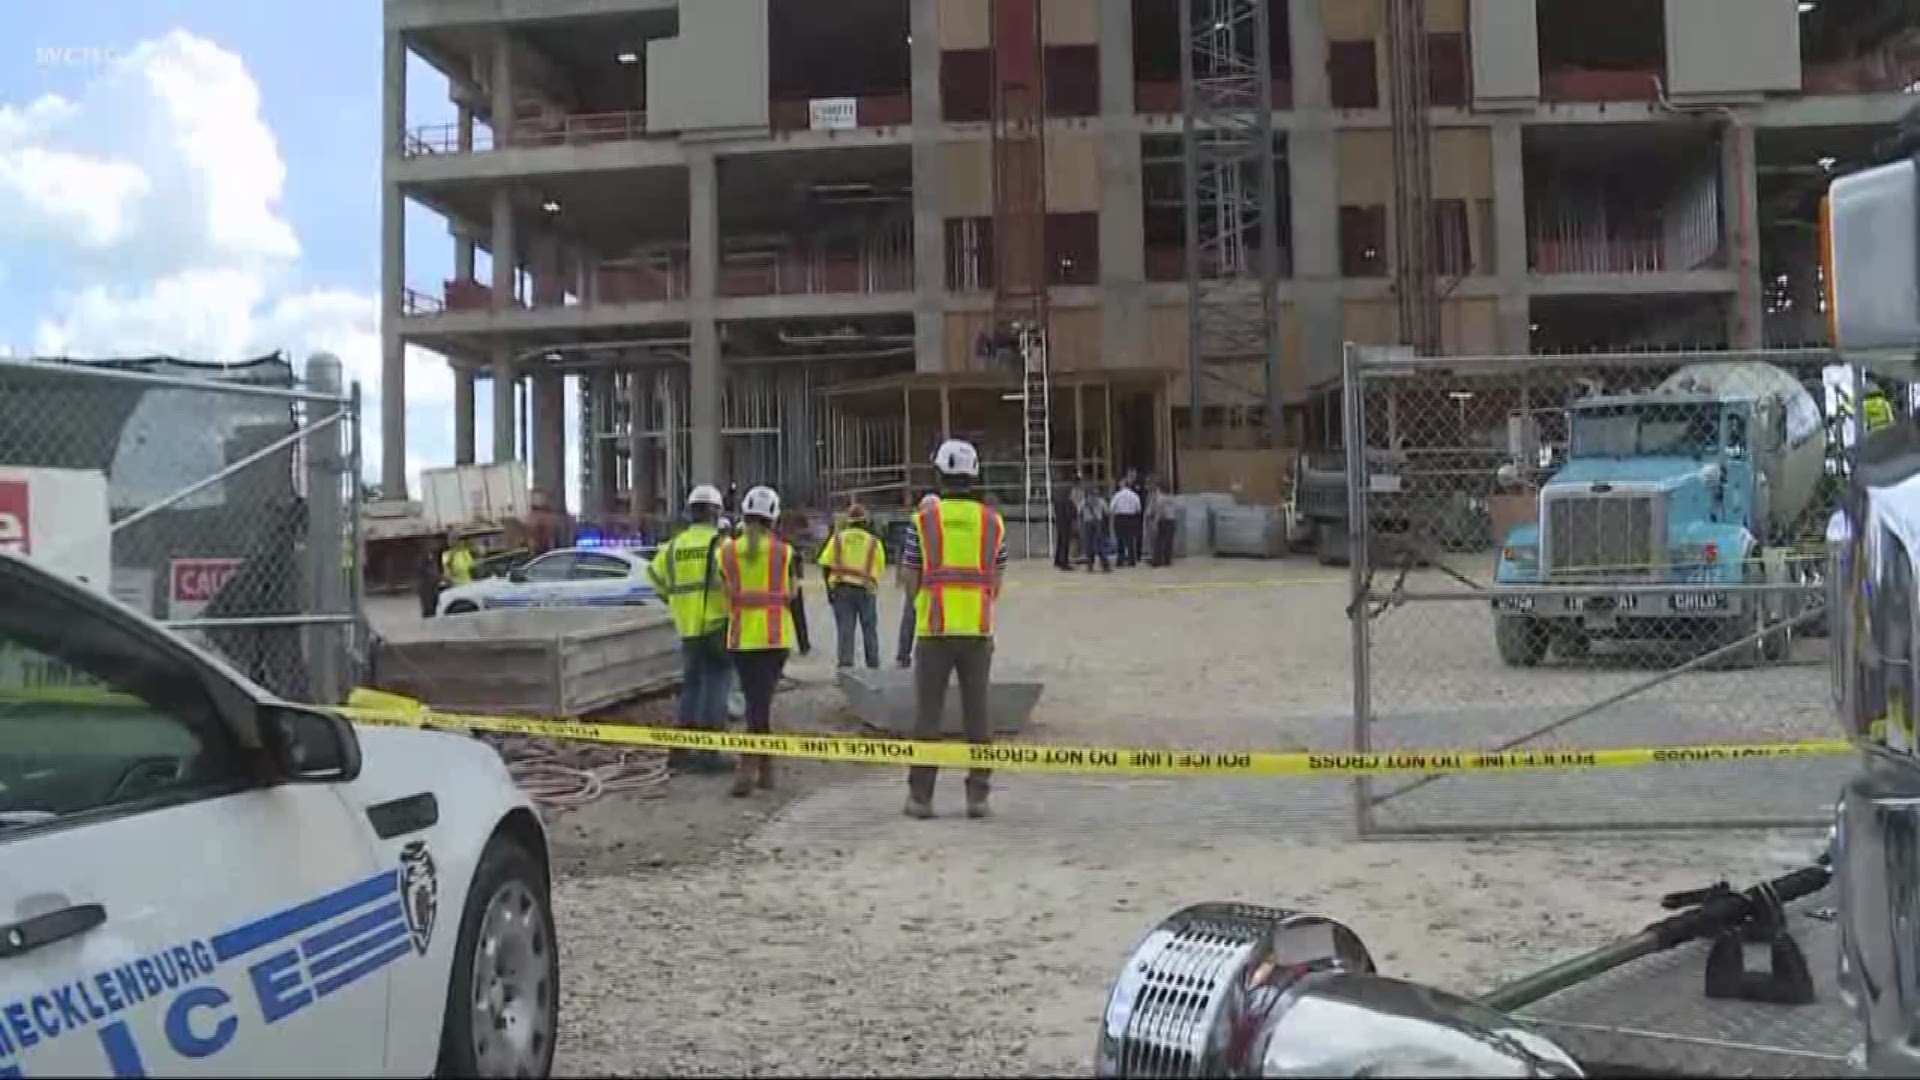 A man was killed Wednesday afternoon when he fell several stories from a building in Uptown.